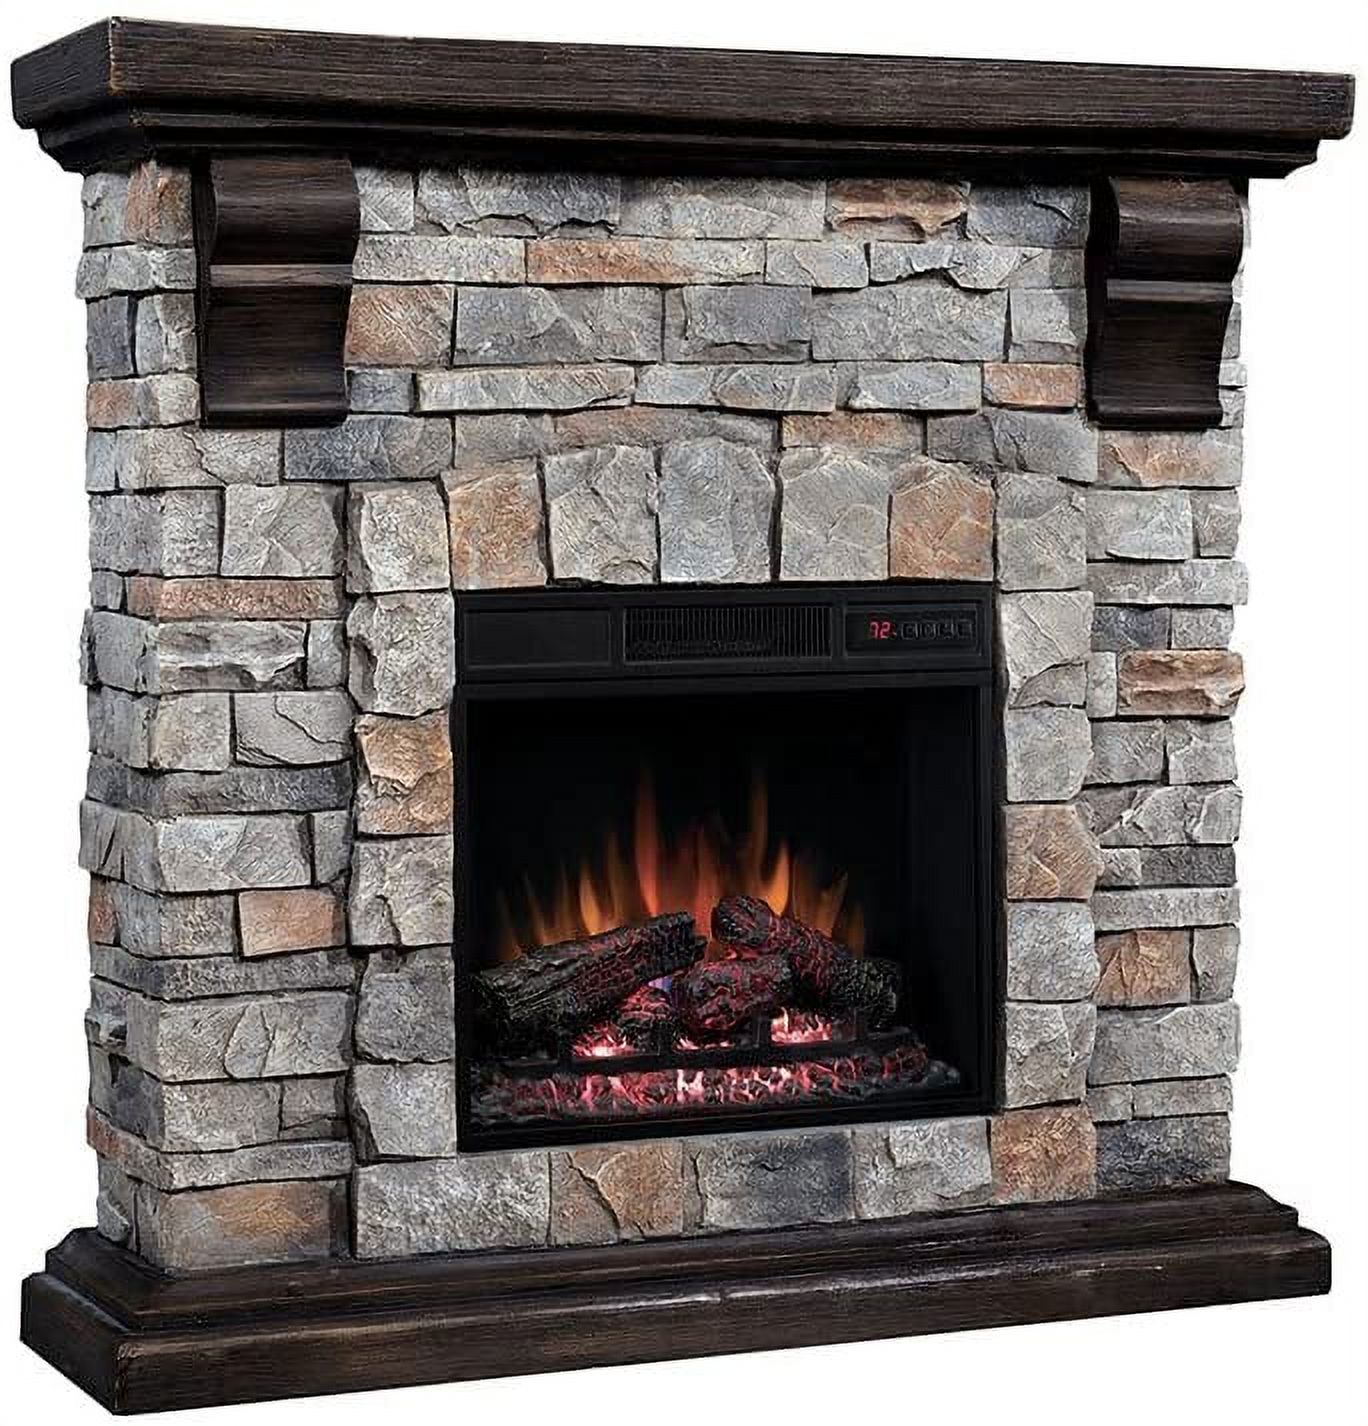 ClassicFlame Denali Stone Electric Fireplace Mantel Package in Brushed Dark Pine - 18WM10400-I601 - image 1 of 4